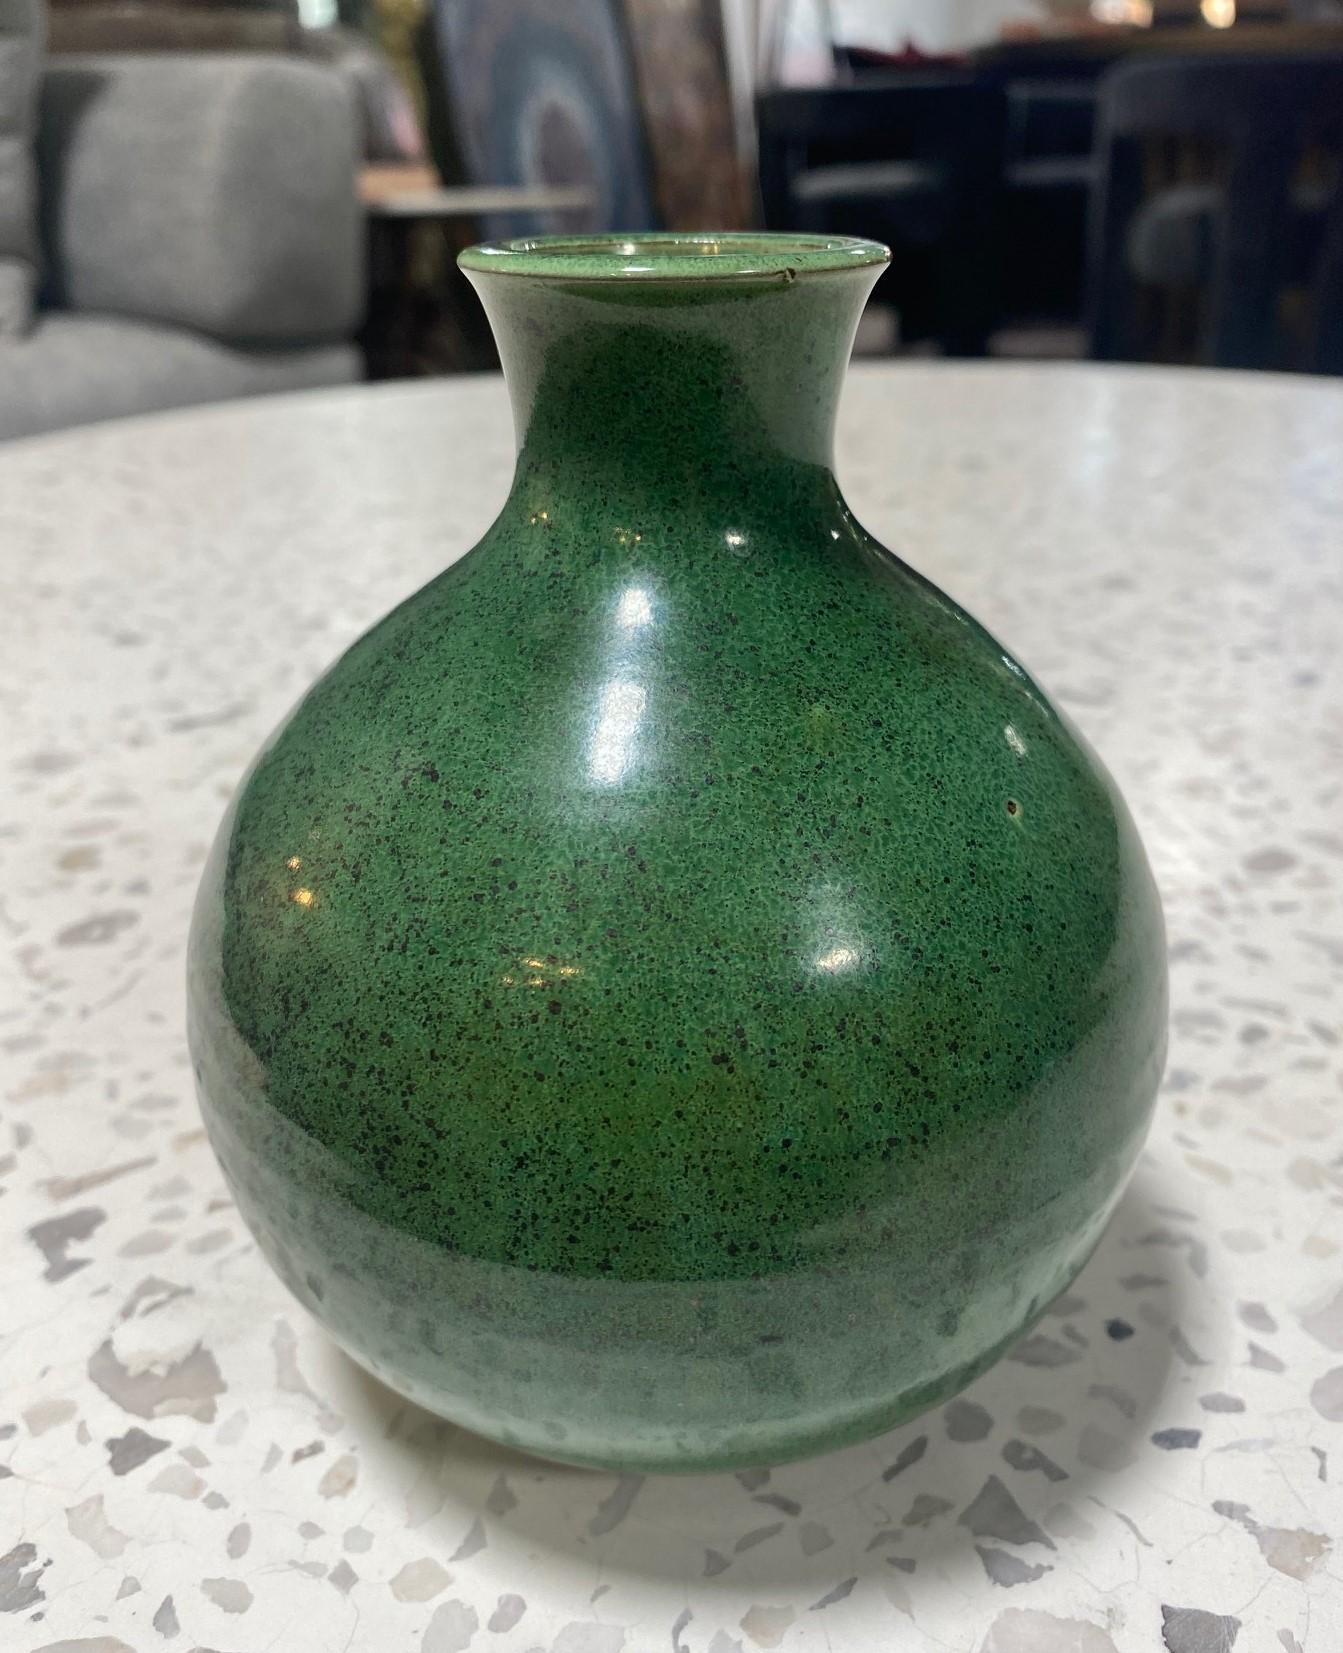 A wonderfully glazed, beautifully crafted, and classically shaped vase/vessel by renowned Canadian master potter Brother Thomas Bezanson (1929-2007).  

Brother Thomas studied design at Nova Scotia College in the late 40s and early 50s,  It was